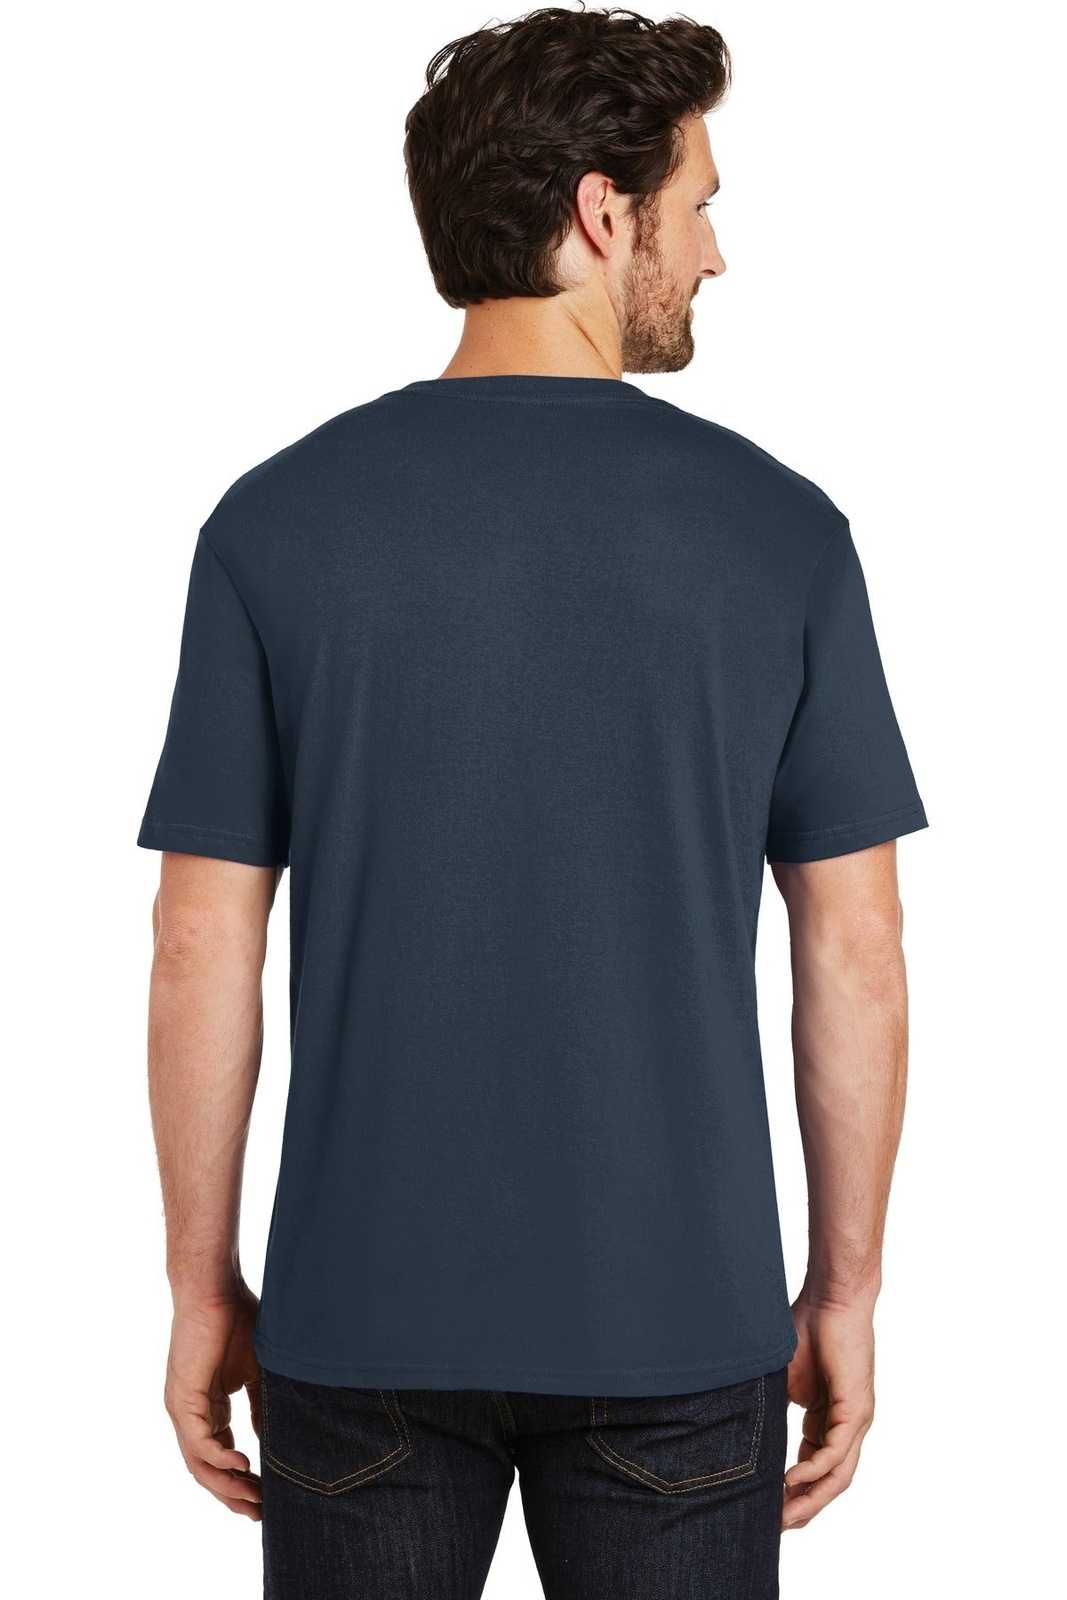 District DT104 Perfect Weight Tee - New Navy - HIT a Double - 1